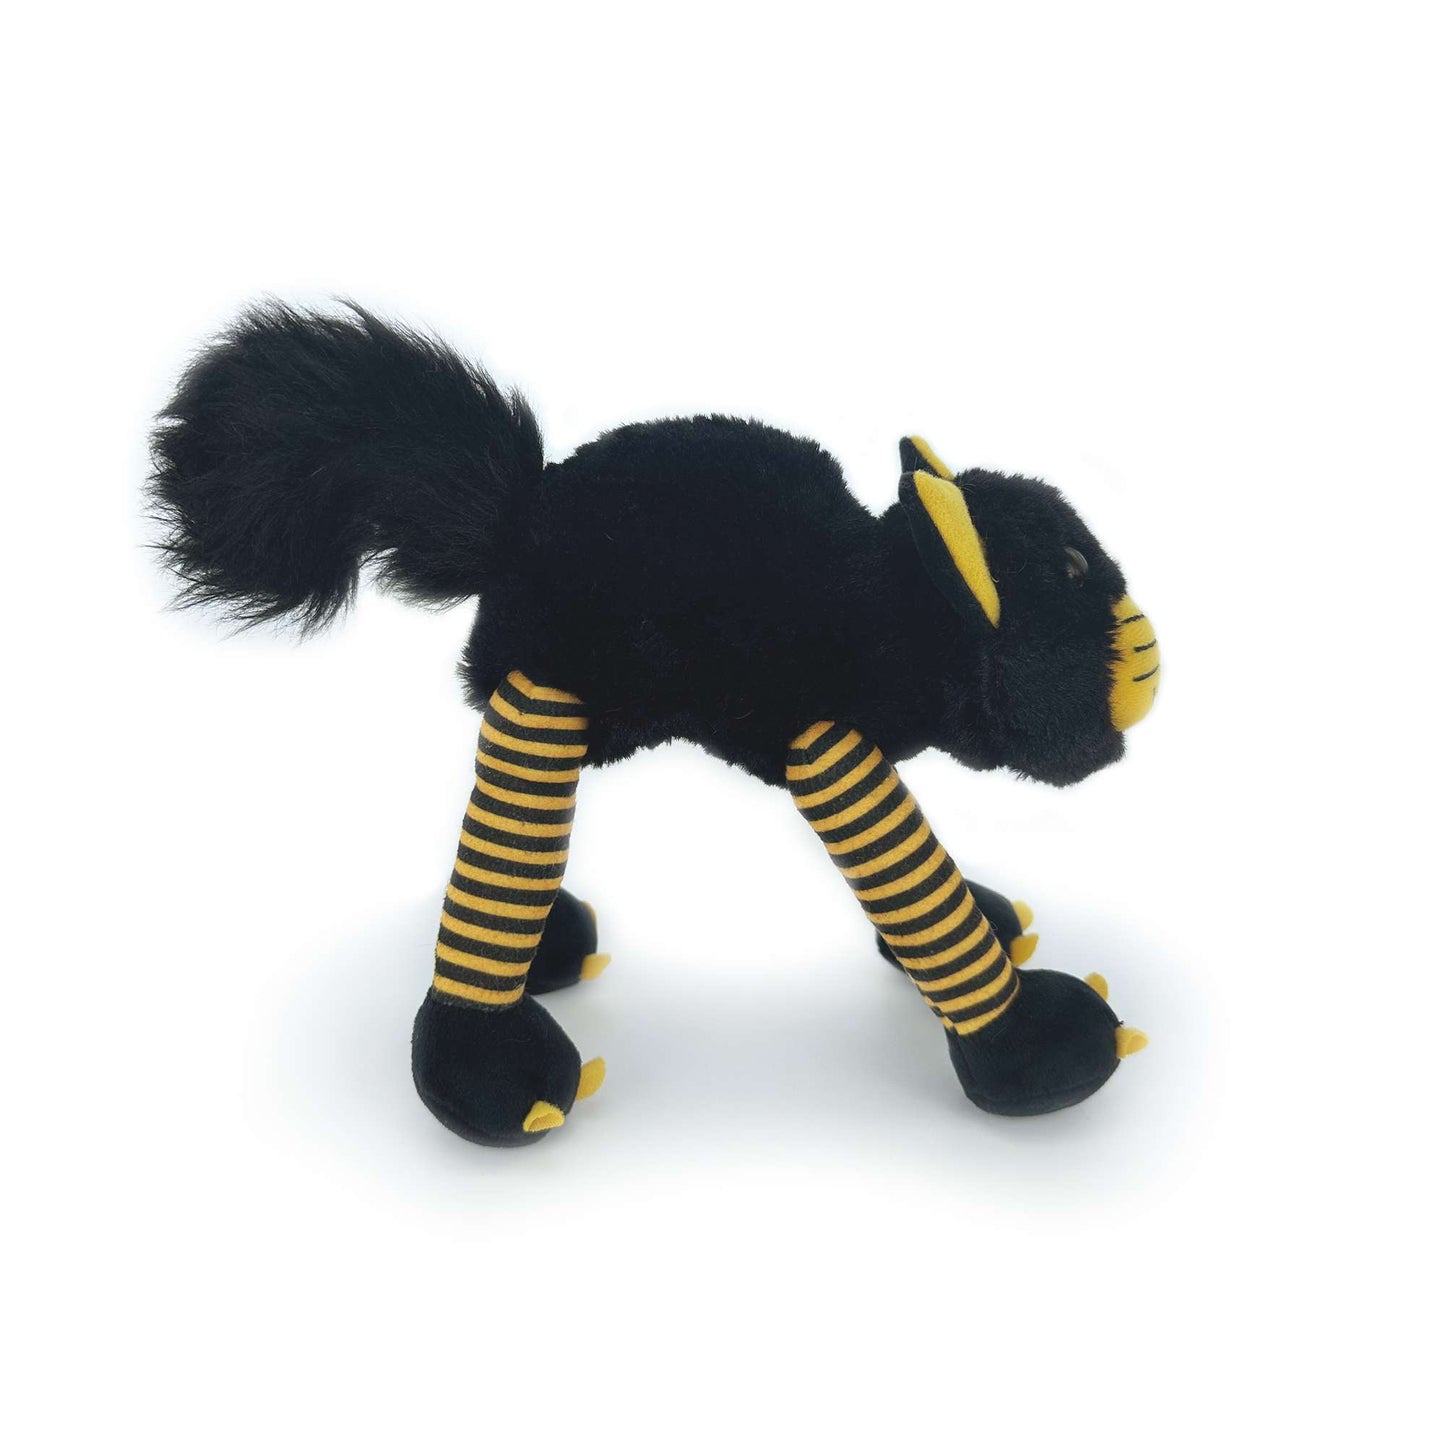 Side view of a stuffed cat